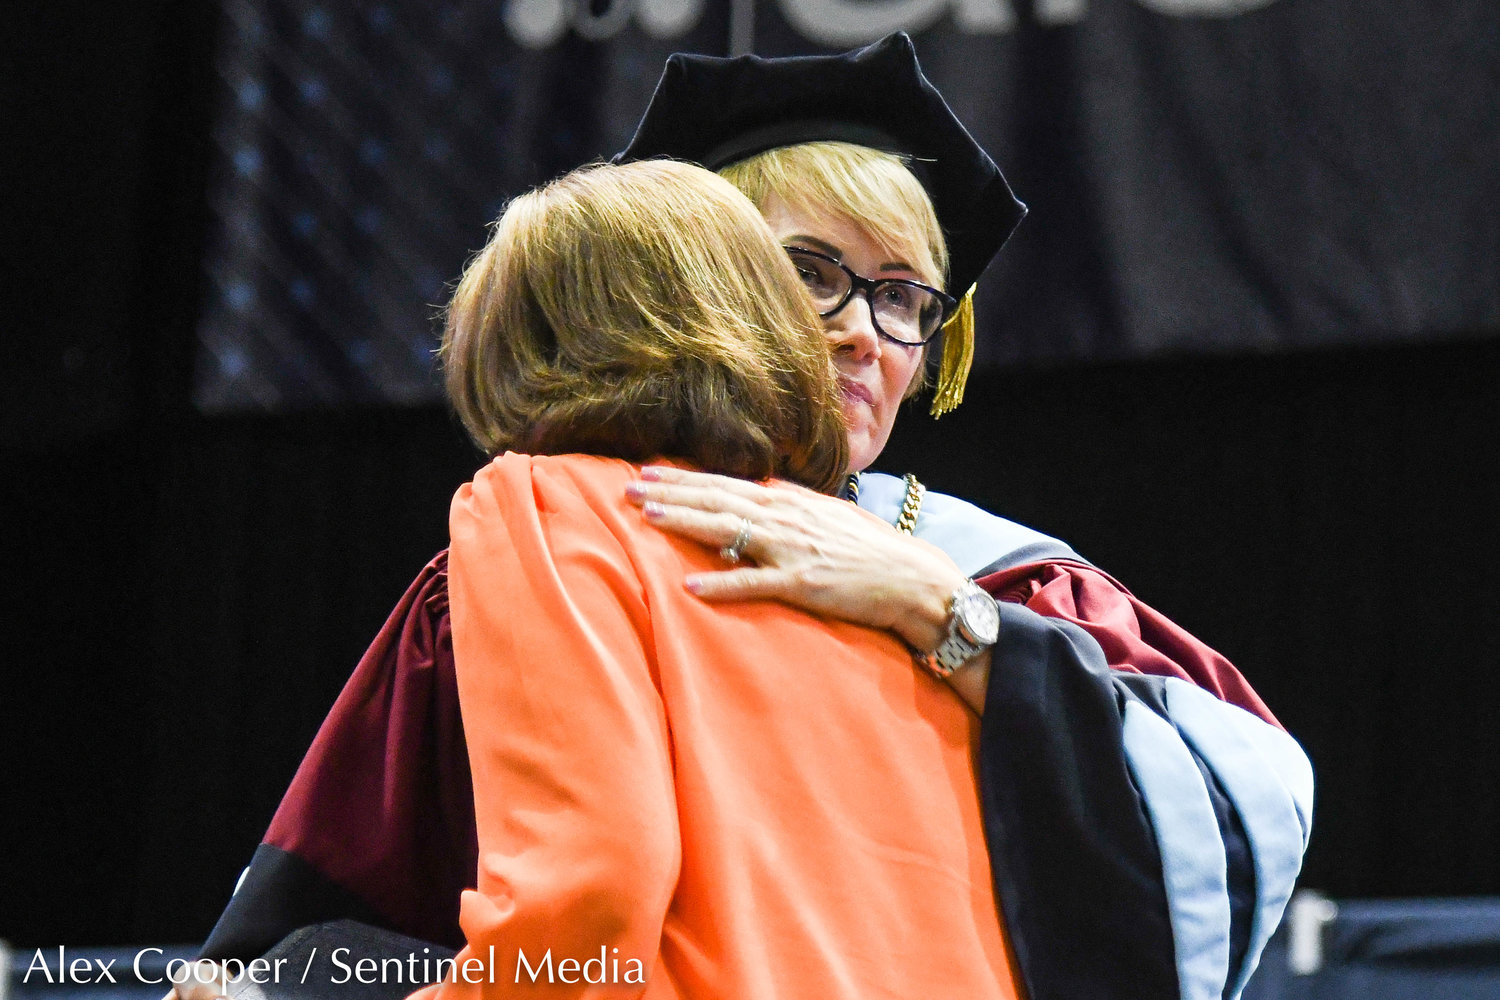 Utica University president Dr. Laura Casamento presents John Paul Ramel's degree to a family member during the school's undergraduate commencement ceremony on Thursday at the Adirondack Bank Center at the Utica Memorial Auditorium.